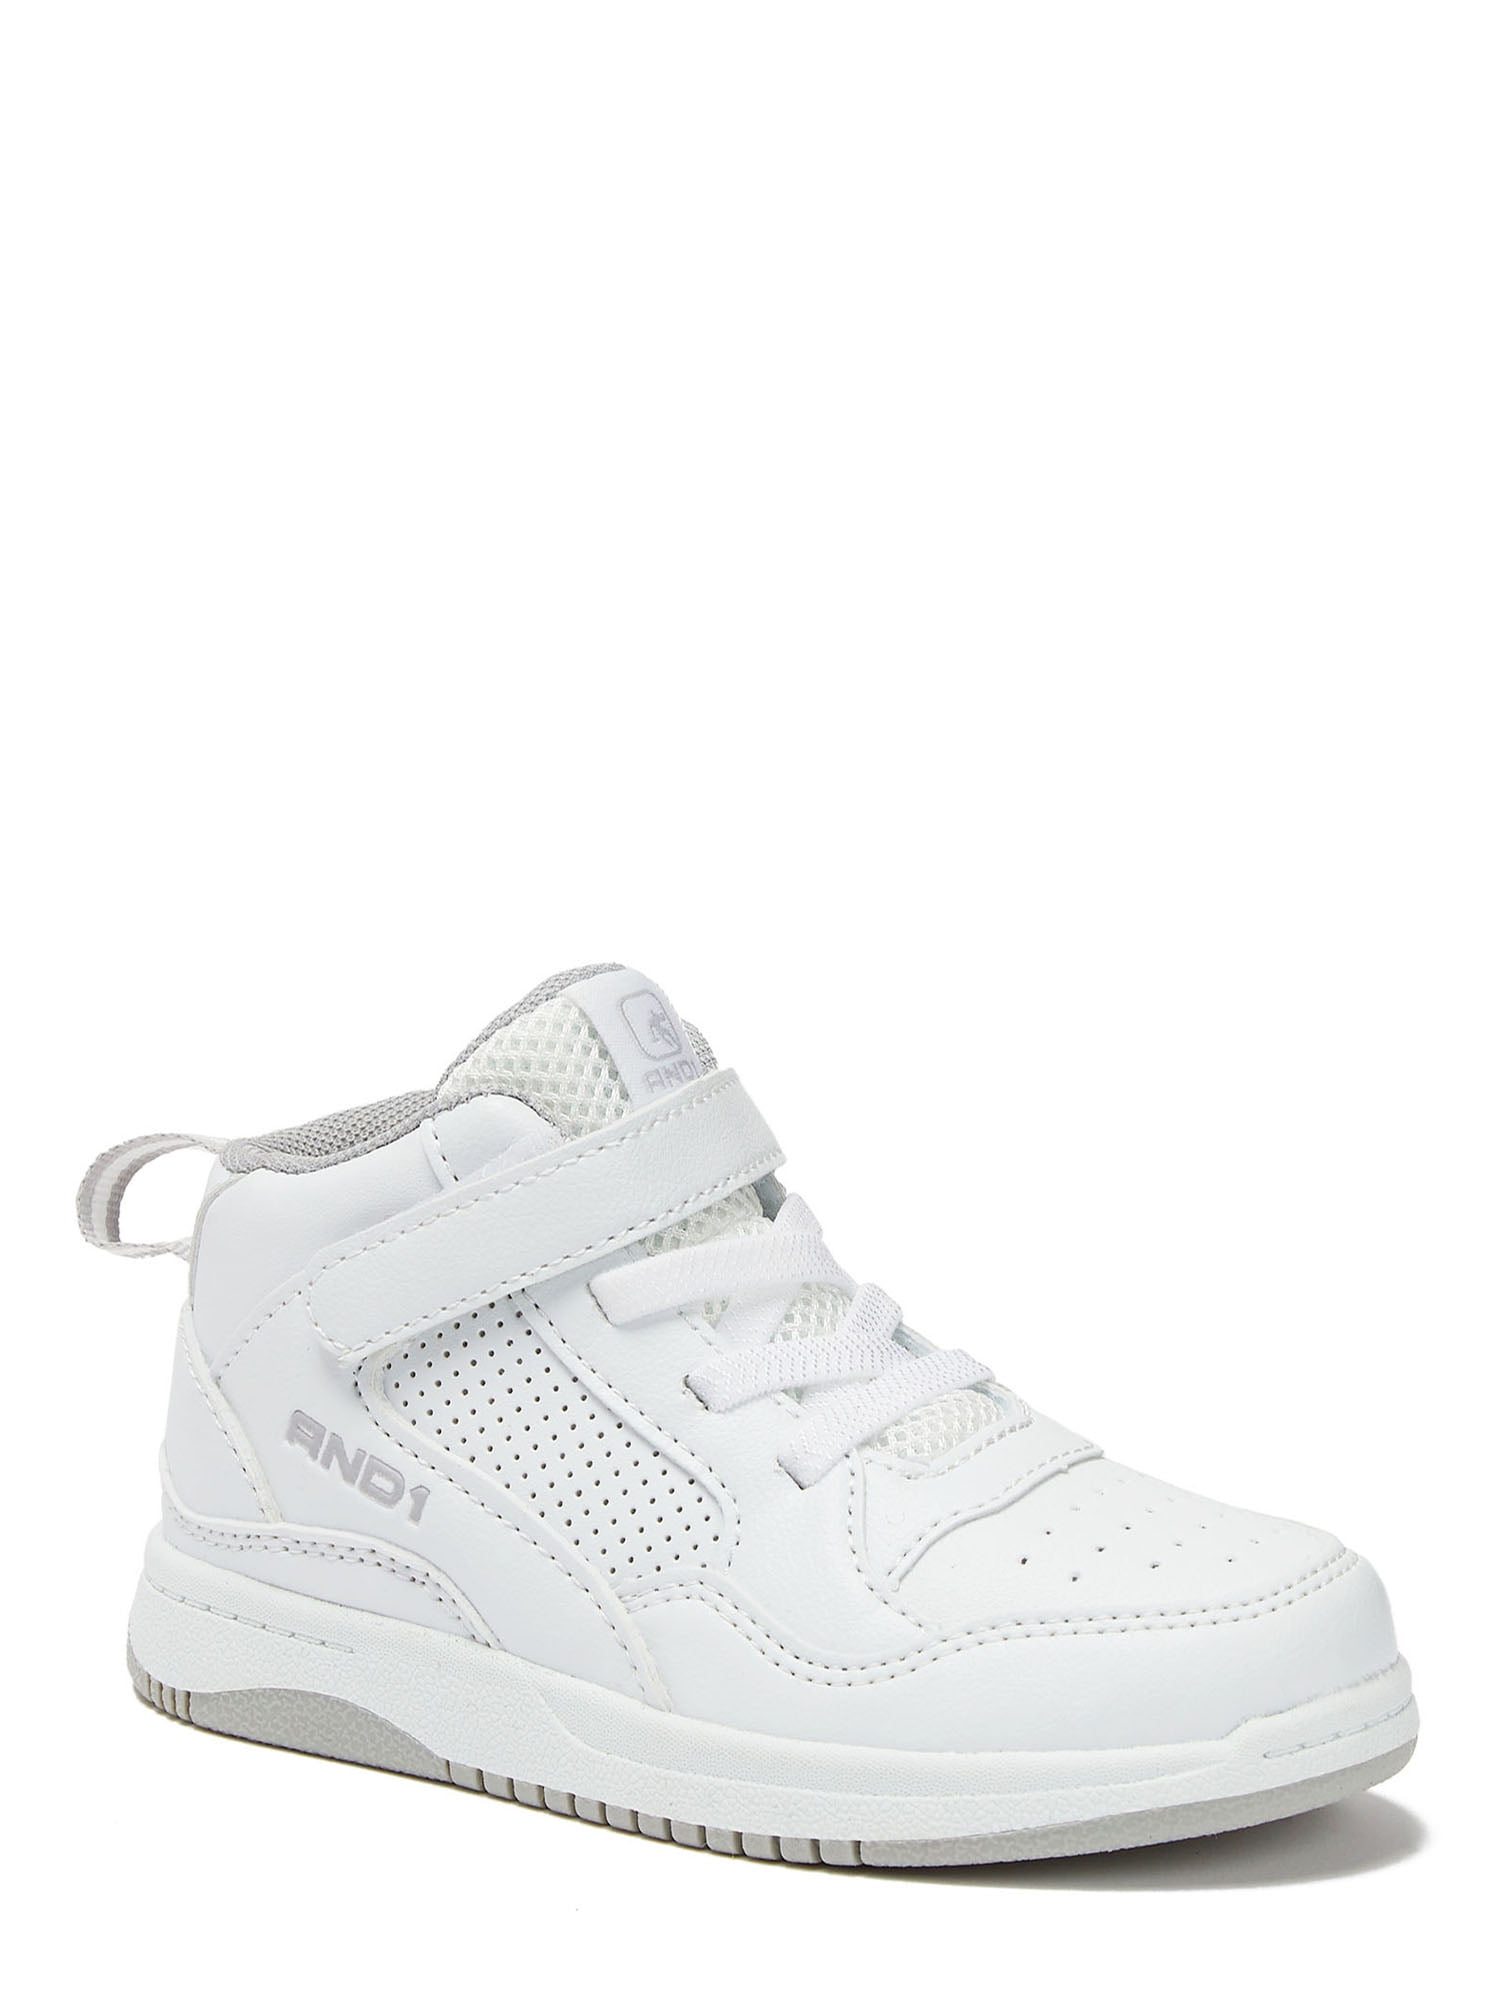 AND1 Toddler Boys Court High Basketball Sneakers, Sizes 7-12